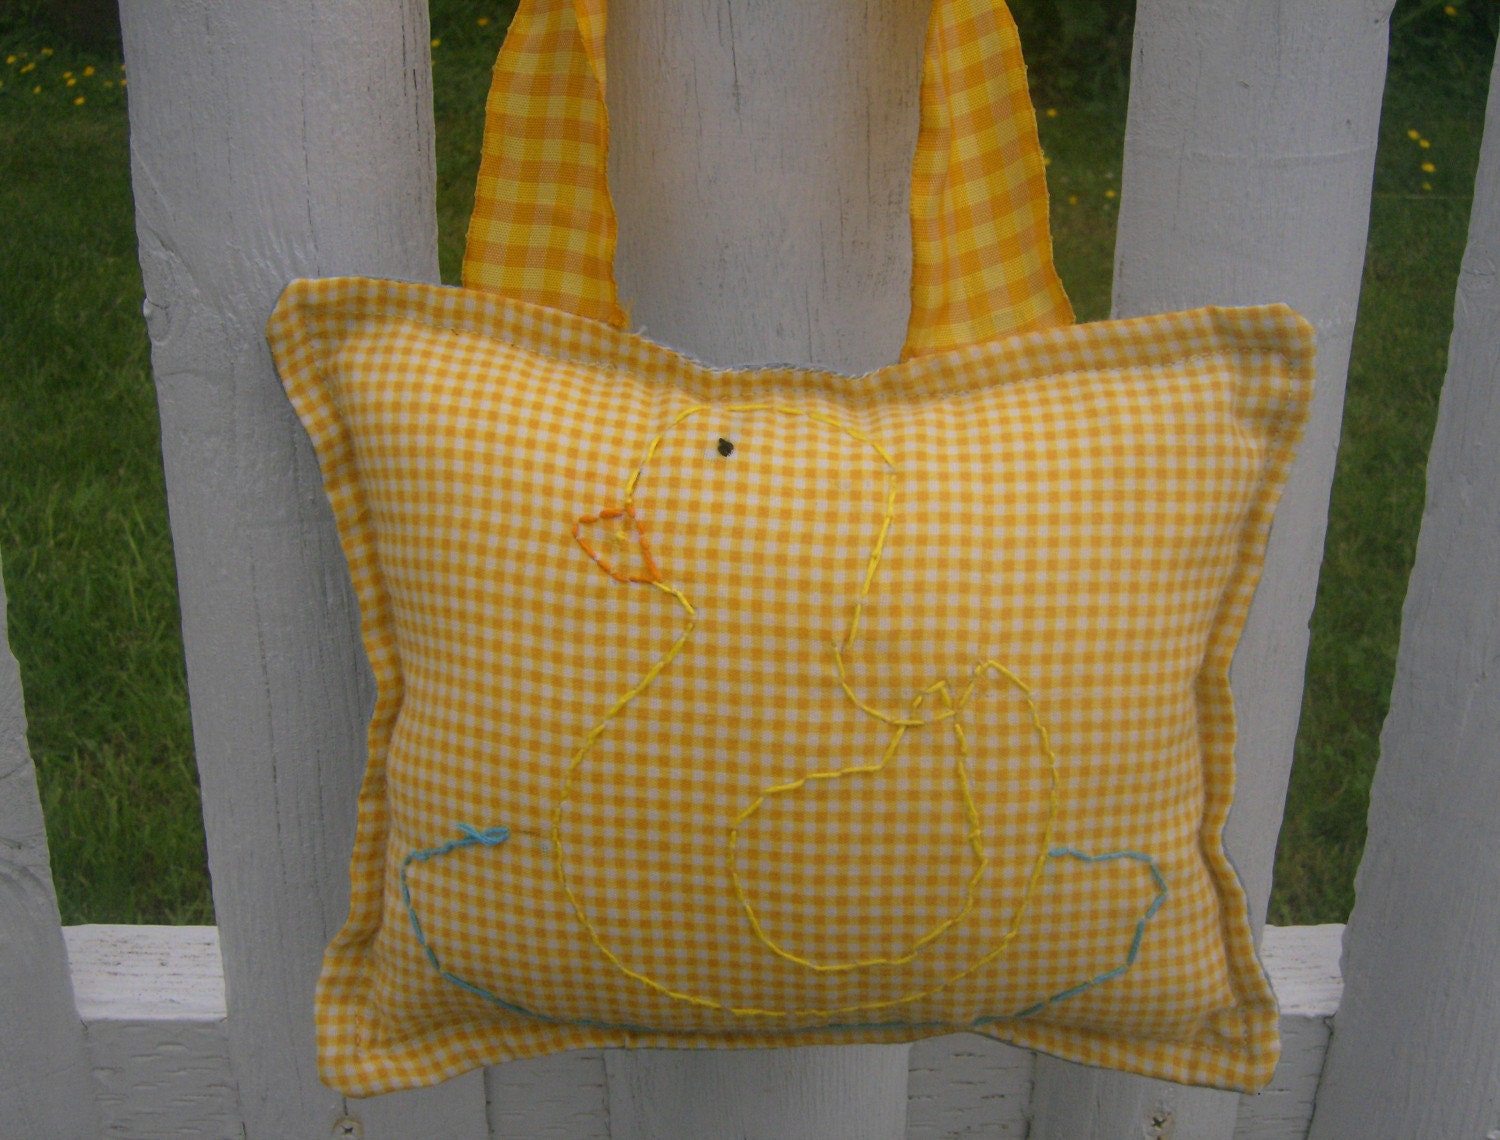 Sweet Duckie Hanging Nursery Pillow embroidered by Hannah age 9